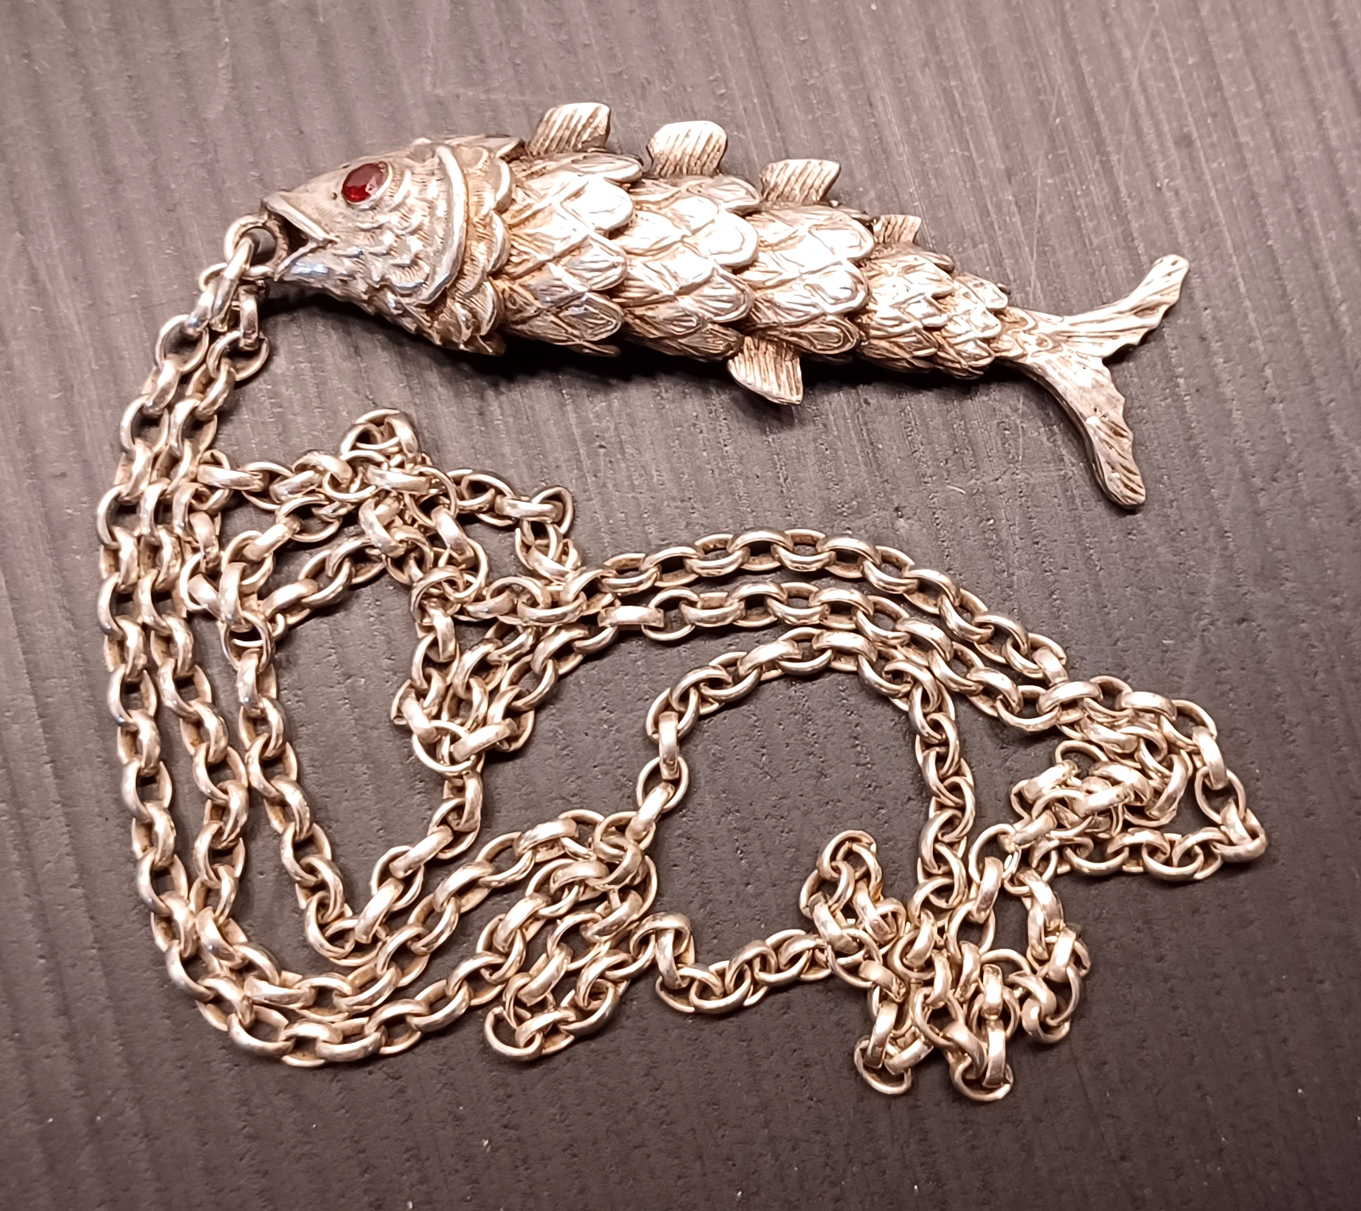 SILVER FISH PENDANT 65MM LONG ON SILVER CHAIN 29" 34.5g